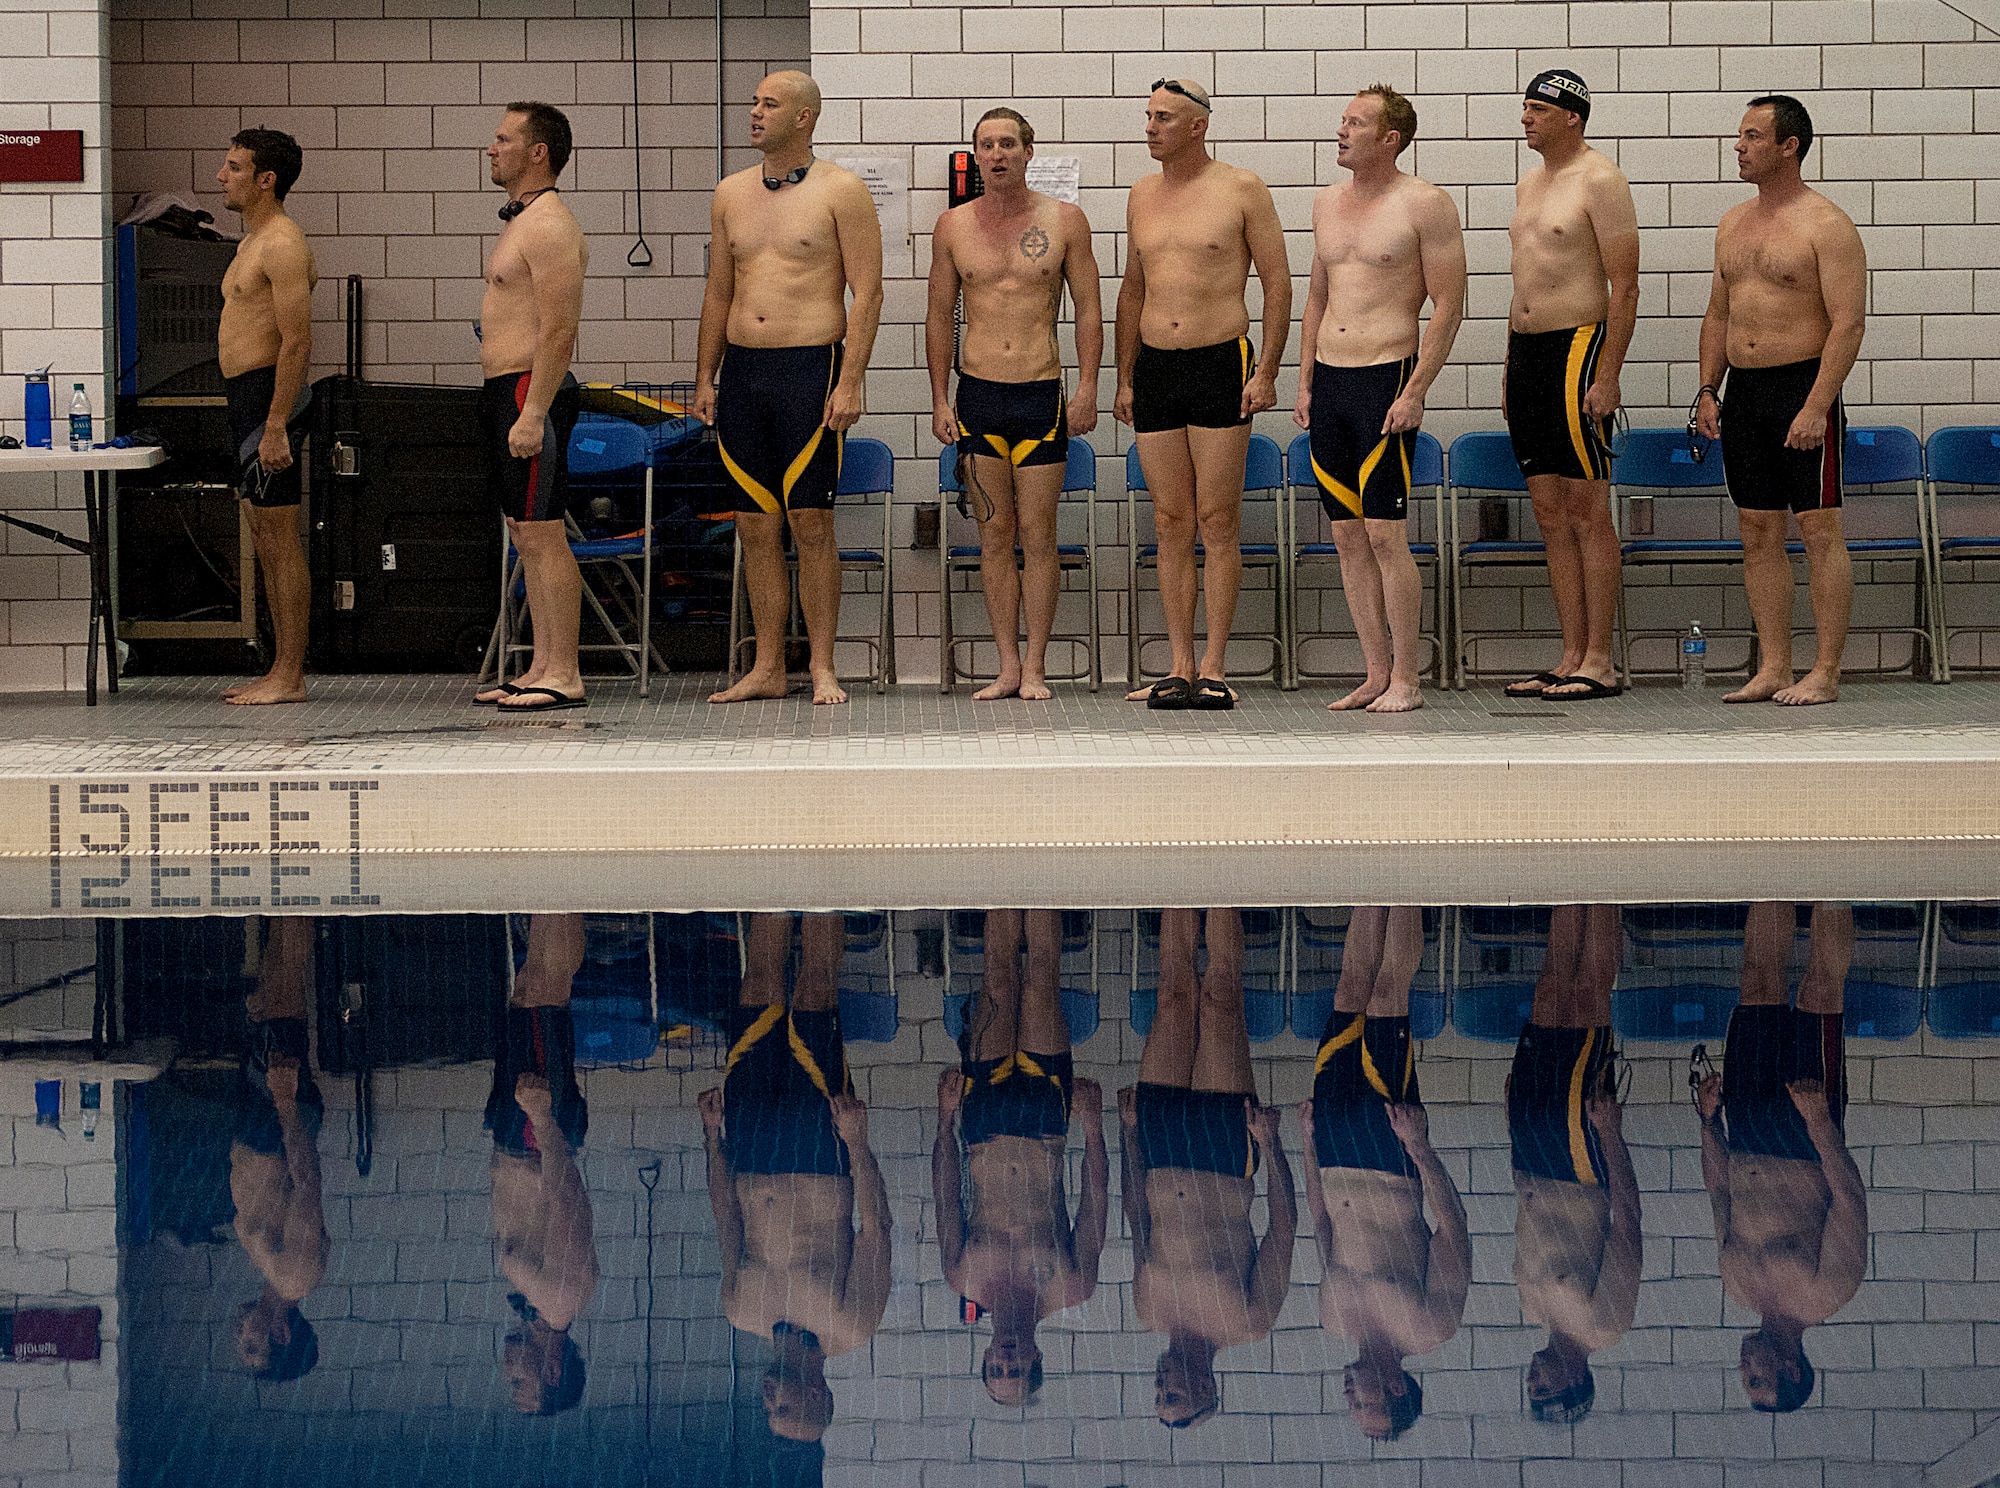 U.S. Air Force Tech. Sgt. Marc Esposito, far left, and other athletes stand at attention during a medal ceremony of the swimming competitions of Warrior Games 2012 at the U.S. Air Force Academy in Colorado Springs, Colo., May 5, 2012. Esposito is with the Special Operations Command team. (U.S. Air Force photo by Val Gempis/Released)